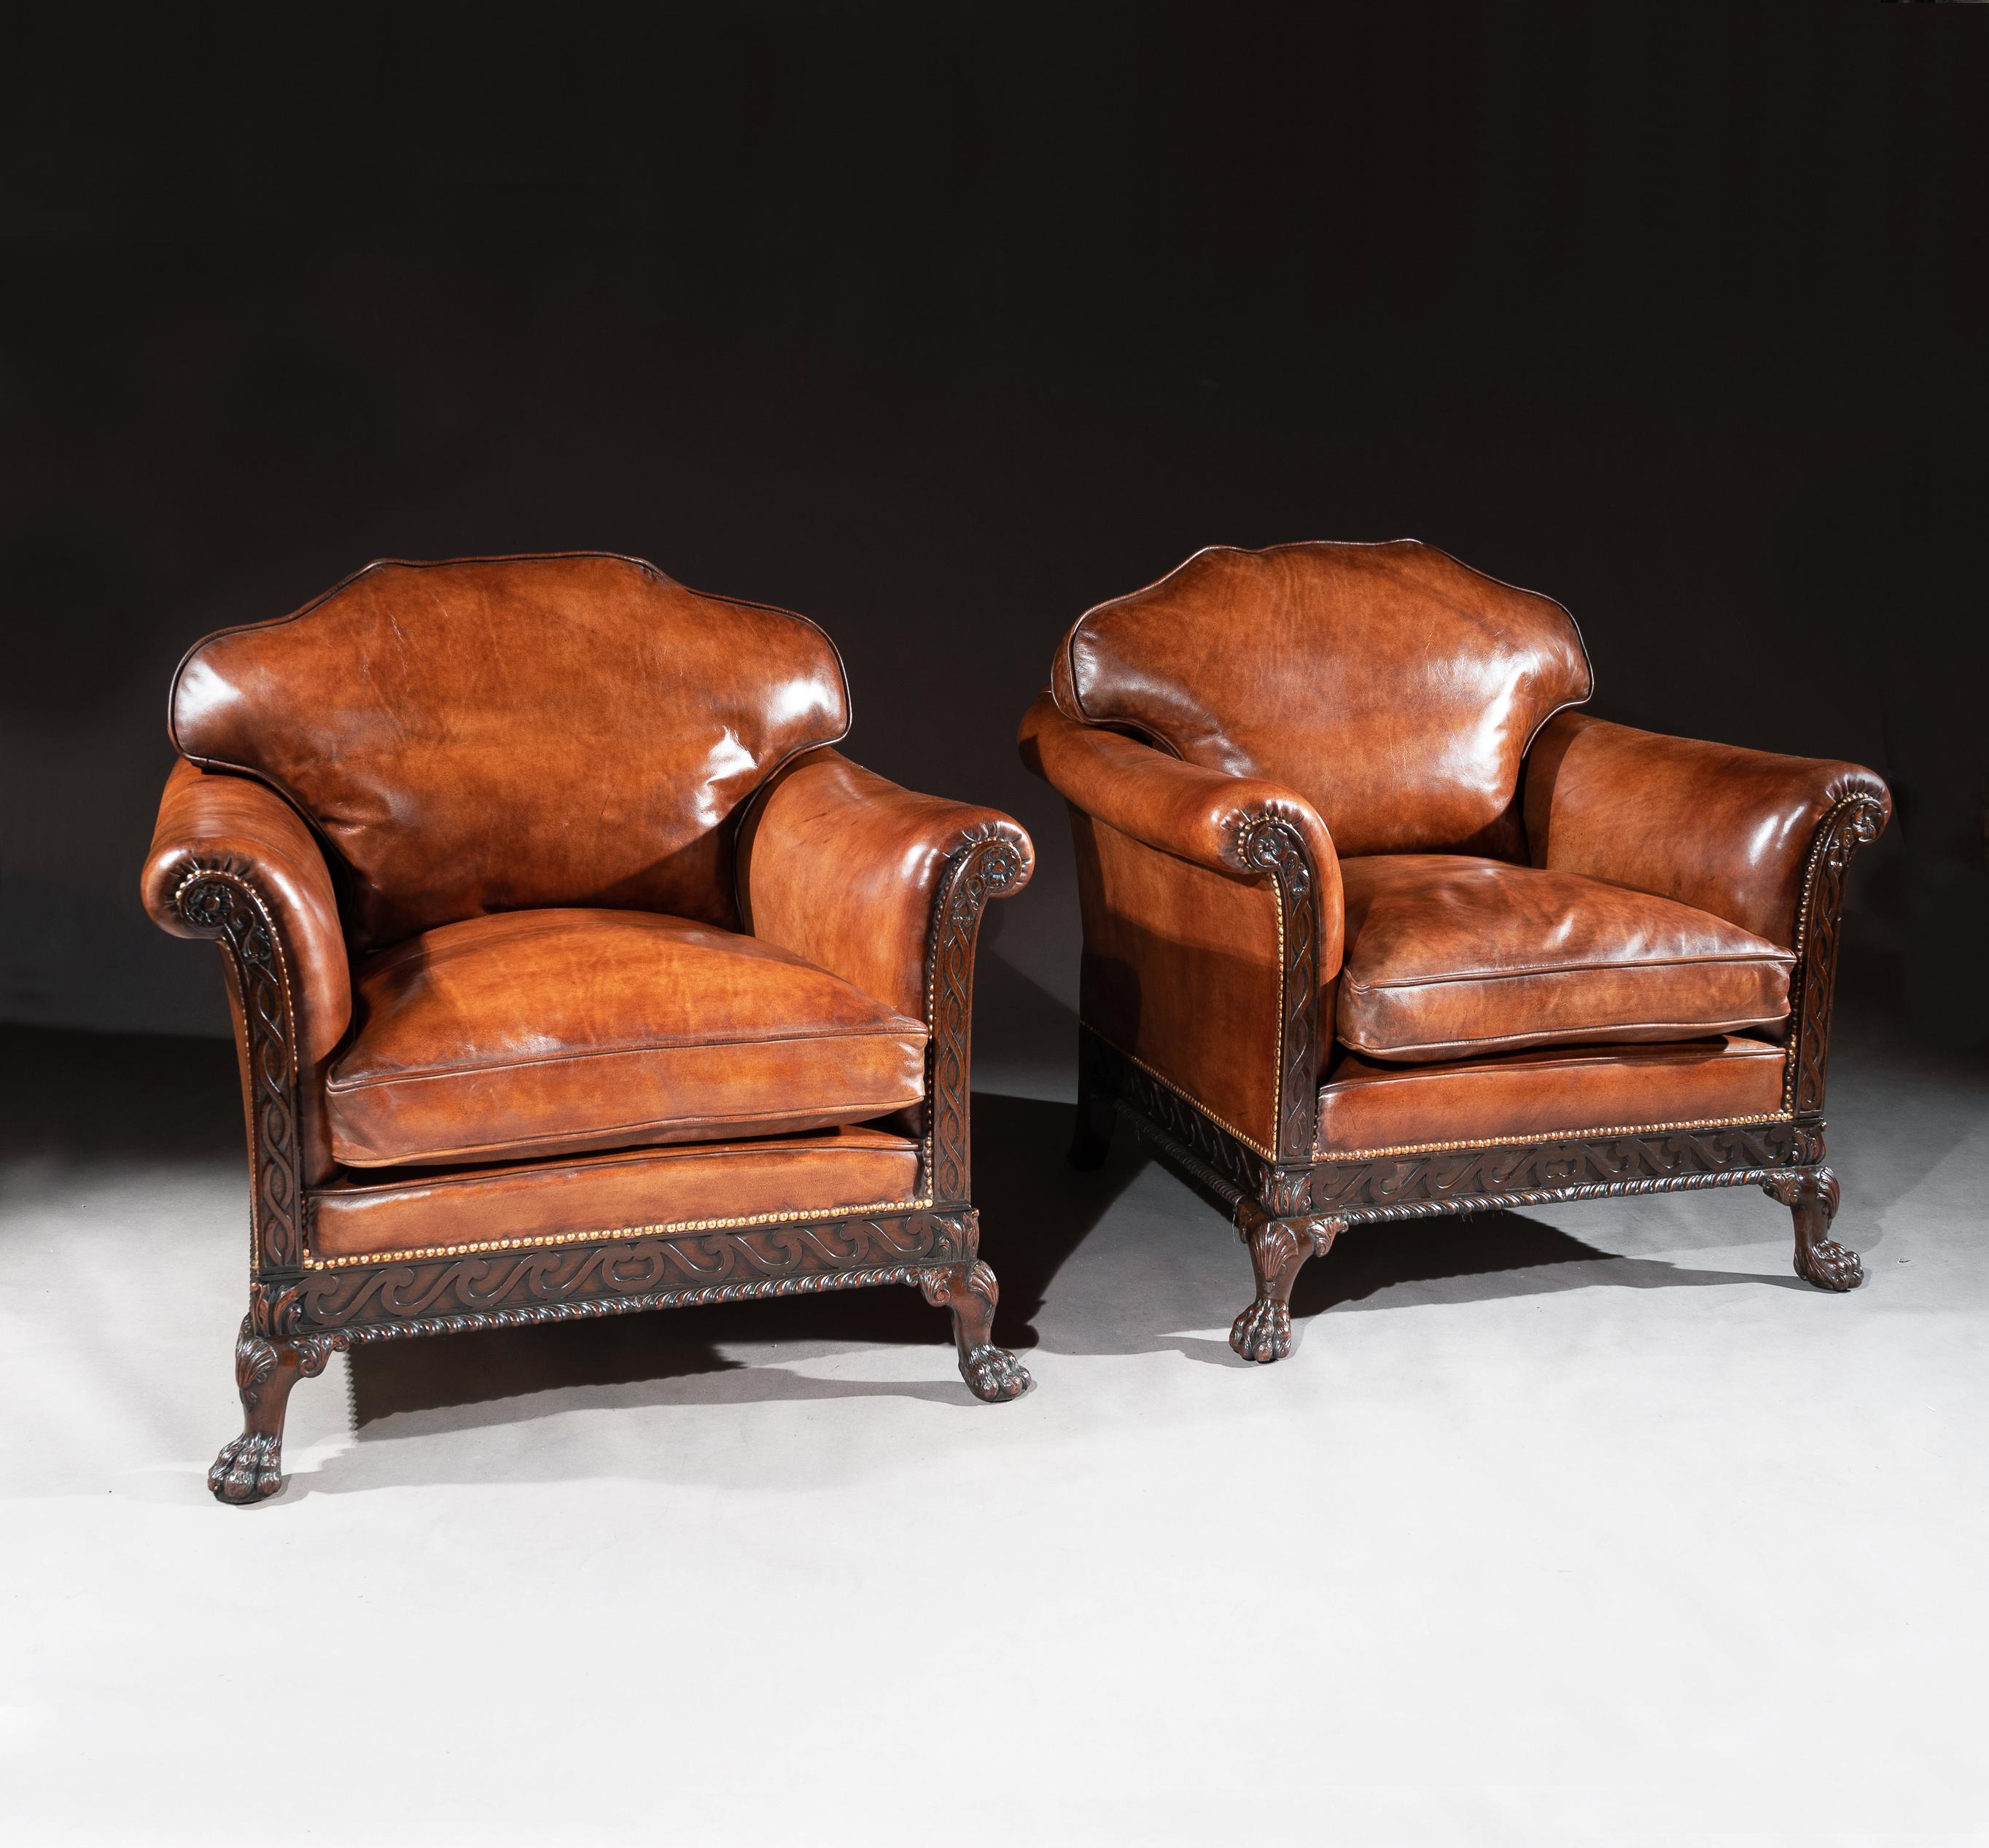 A fine pair of late 19th century George II style carved mahogany country house leather upholstered armchairs of generous proportions.

English, circa 1880


A handsome pair of antique leather armchairs having the desirable feathered cushioned